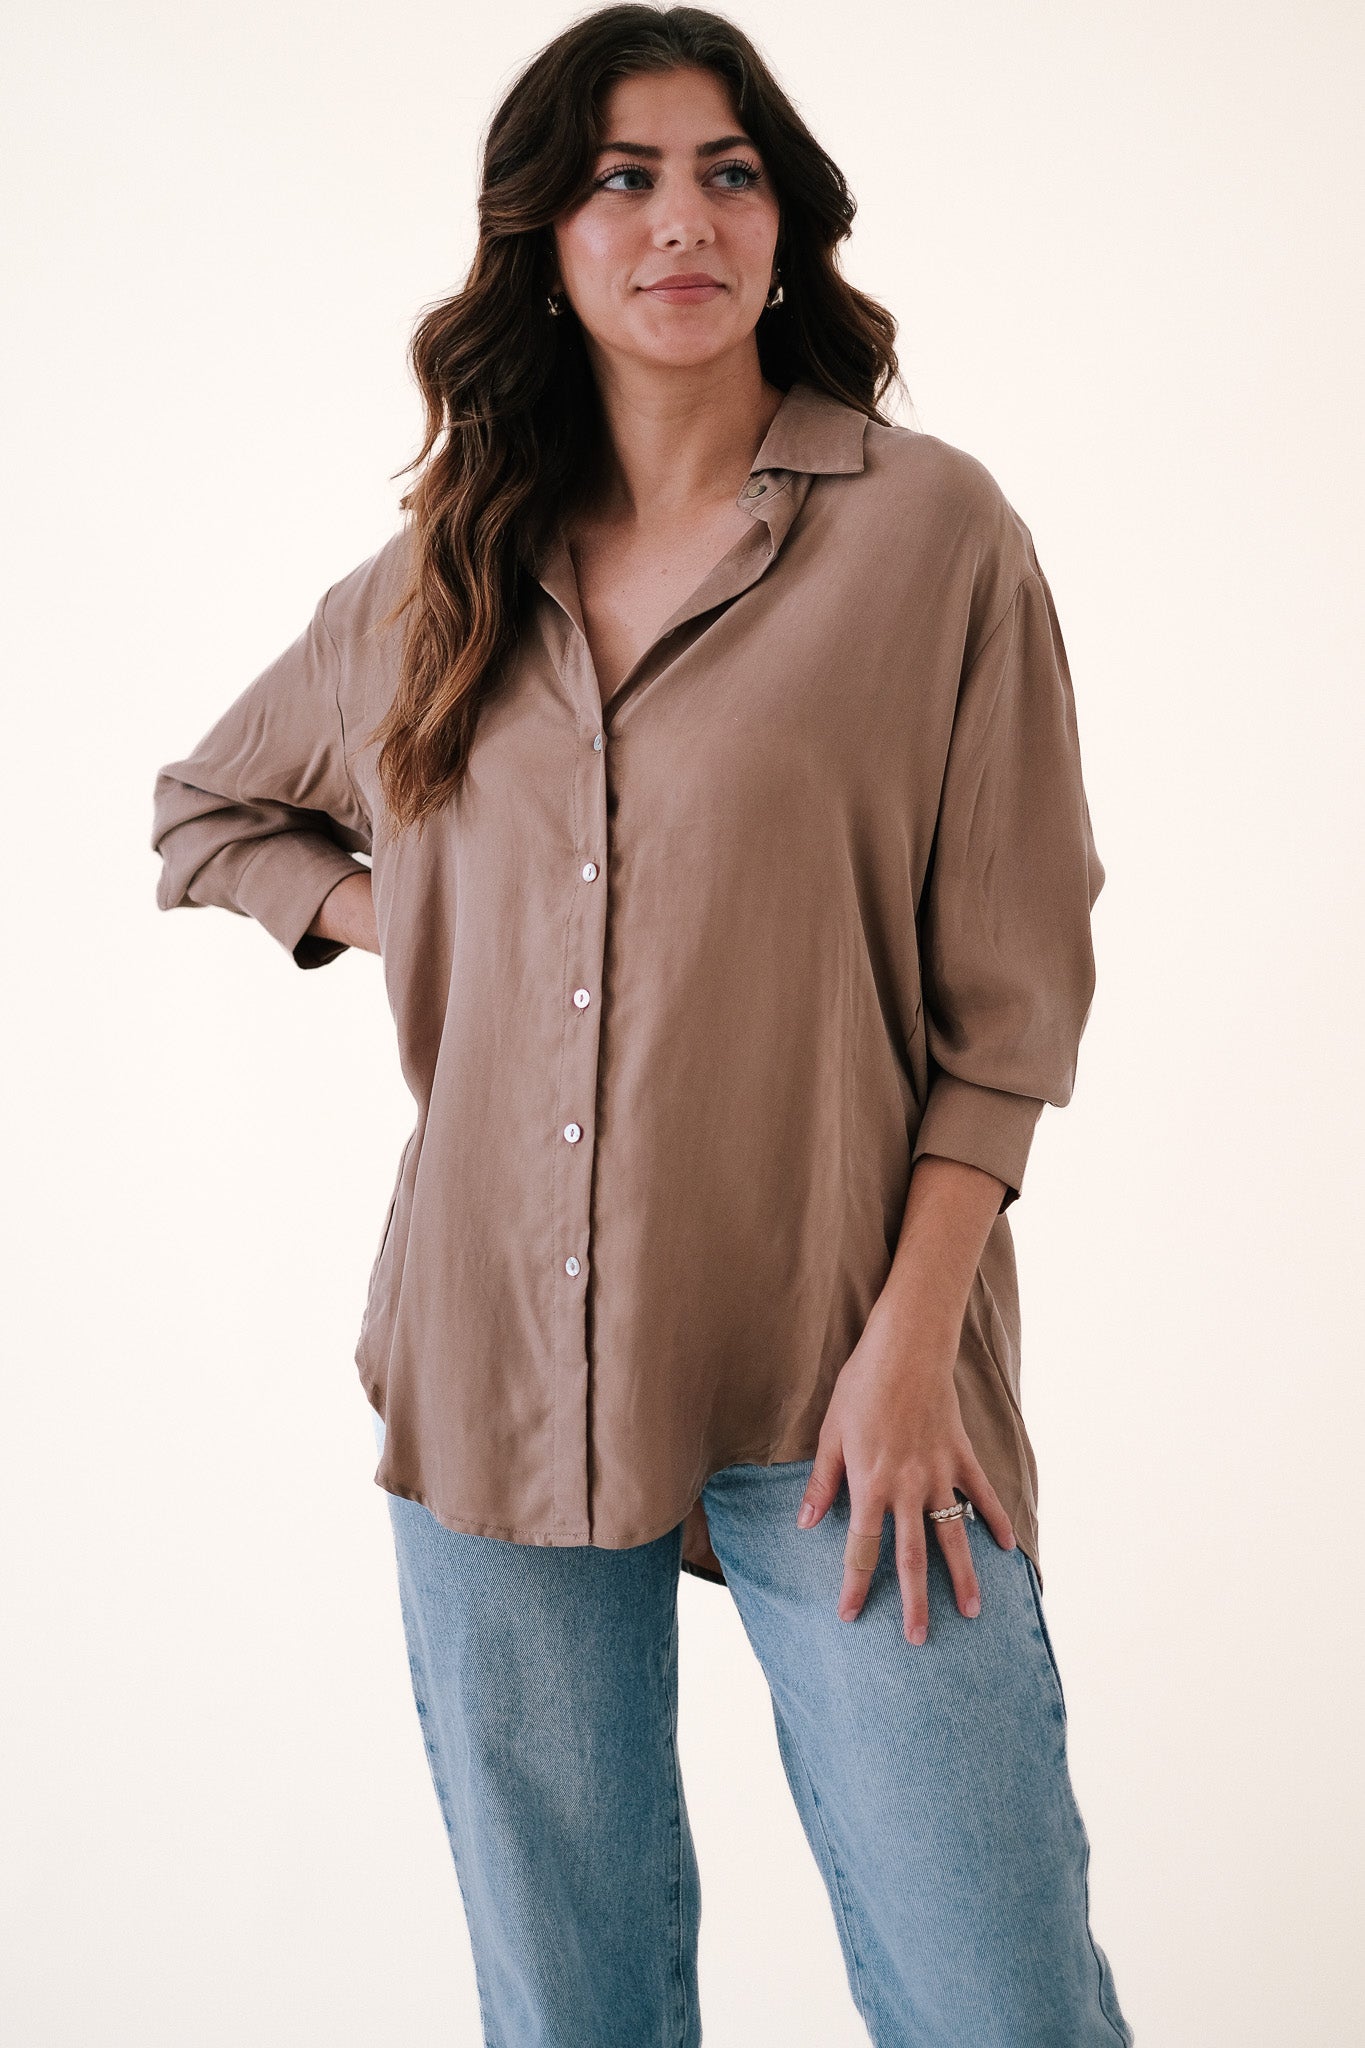 Lucy Paris Maggie Coffee Soft Suede Buttoned Top